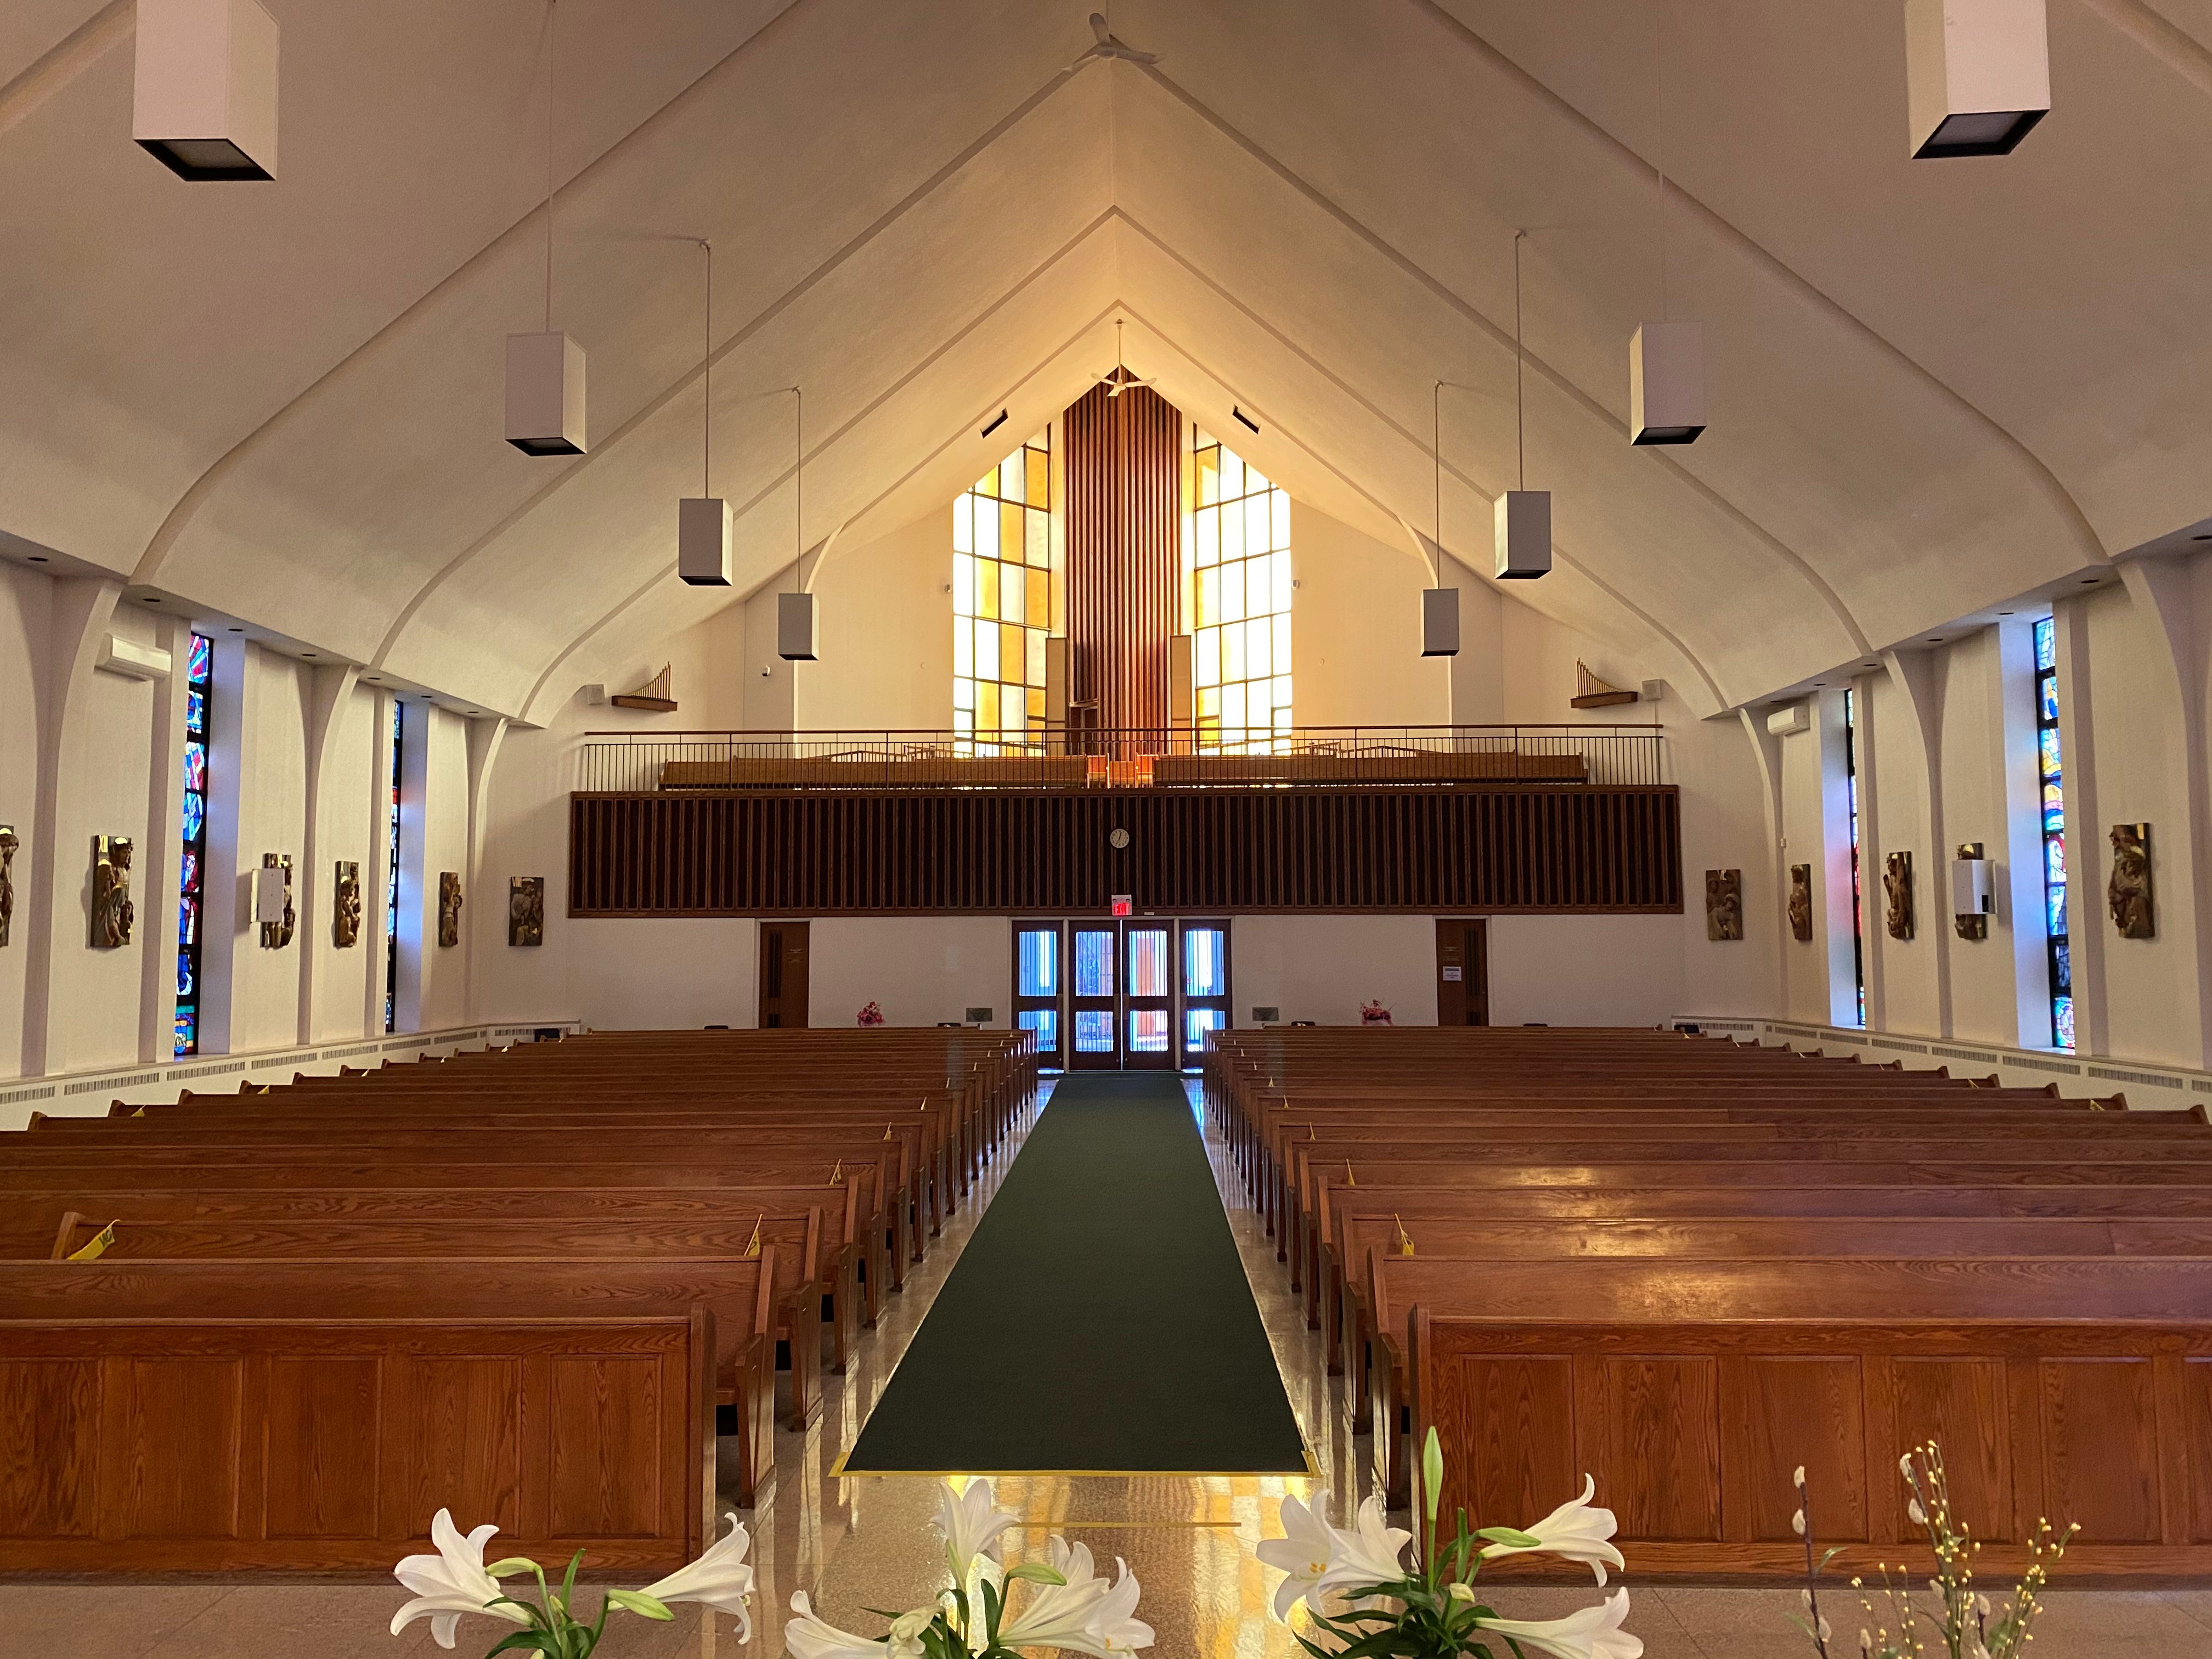 Church interior view from the altar facing pews